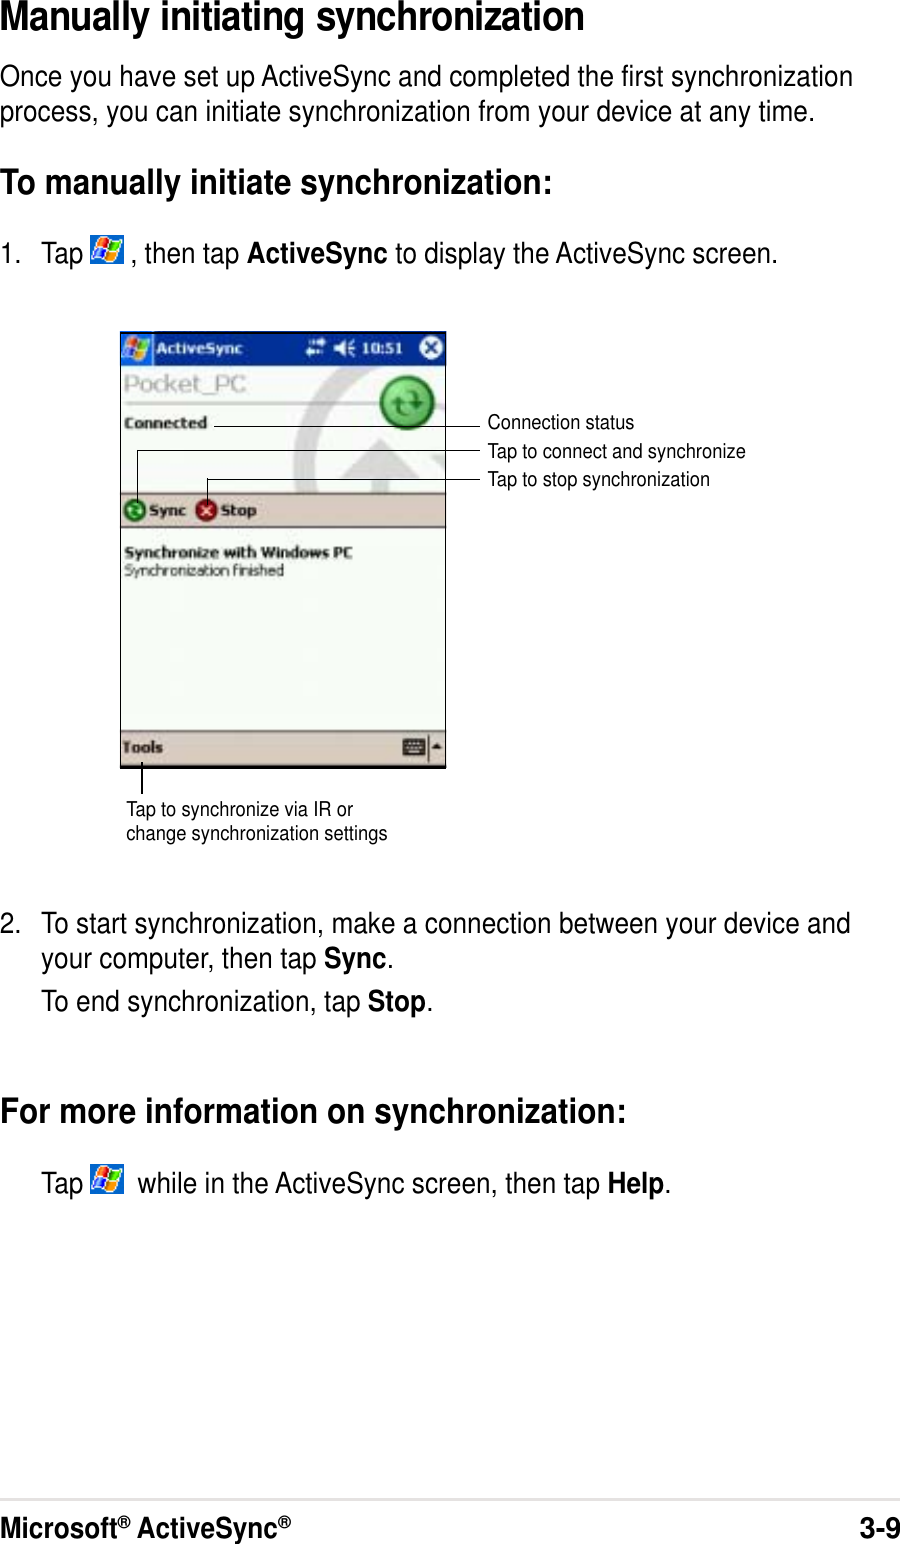 Microsoft® ActiveSync®3-9Manually initiating synchronizationOnce you have set up ActiveSync and completed the first synchronizationprocess, you can initiate synchronization from your device at any time.To manually initiate synchronization:1. Tap   , then tap ActiveSync to display the ActiveSync screen.2. To start synchronization, make a connection between your device andyour computer, then tap Sync.To end synchronization, tap Stop.For more information on synchronization:Tap    while in the ActiveSync screen, then tap Help.Connection statusTap to connect and synchronizeTap to stop synchronizationTap to synchronize via IR orchange synchronization settings